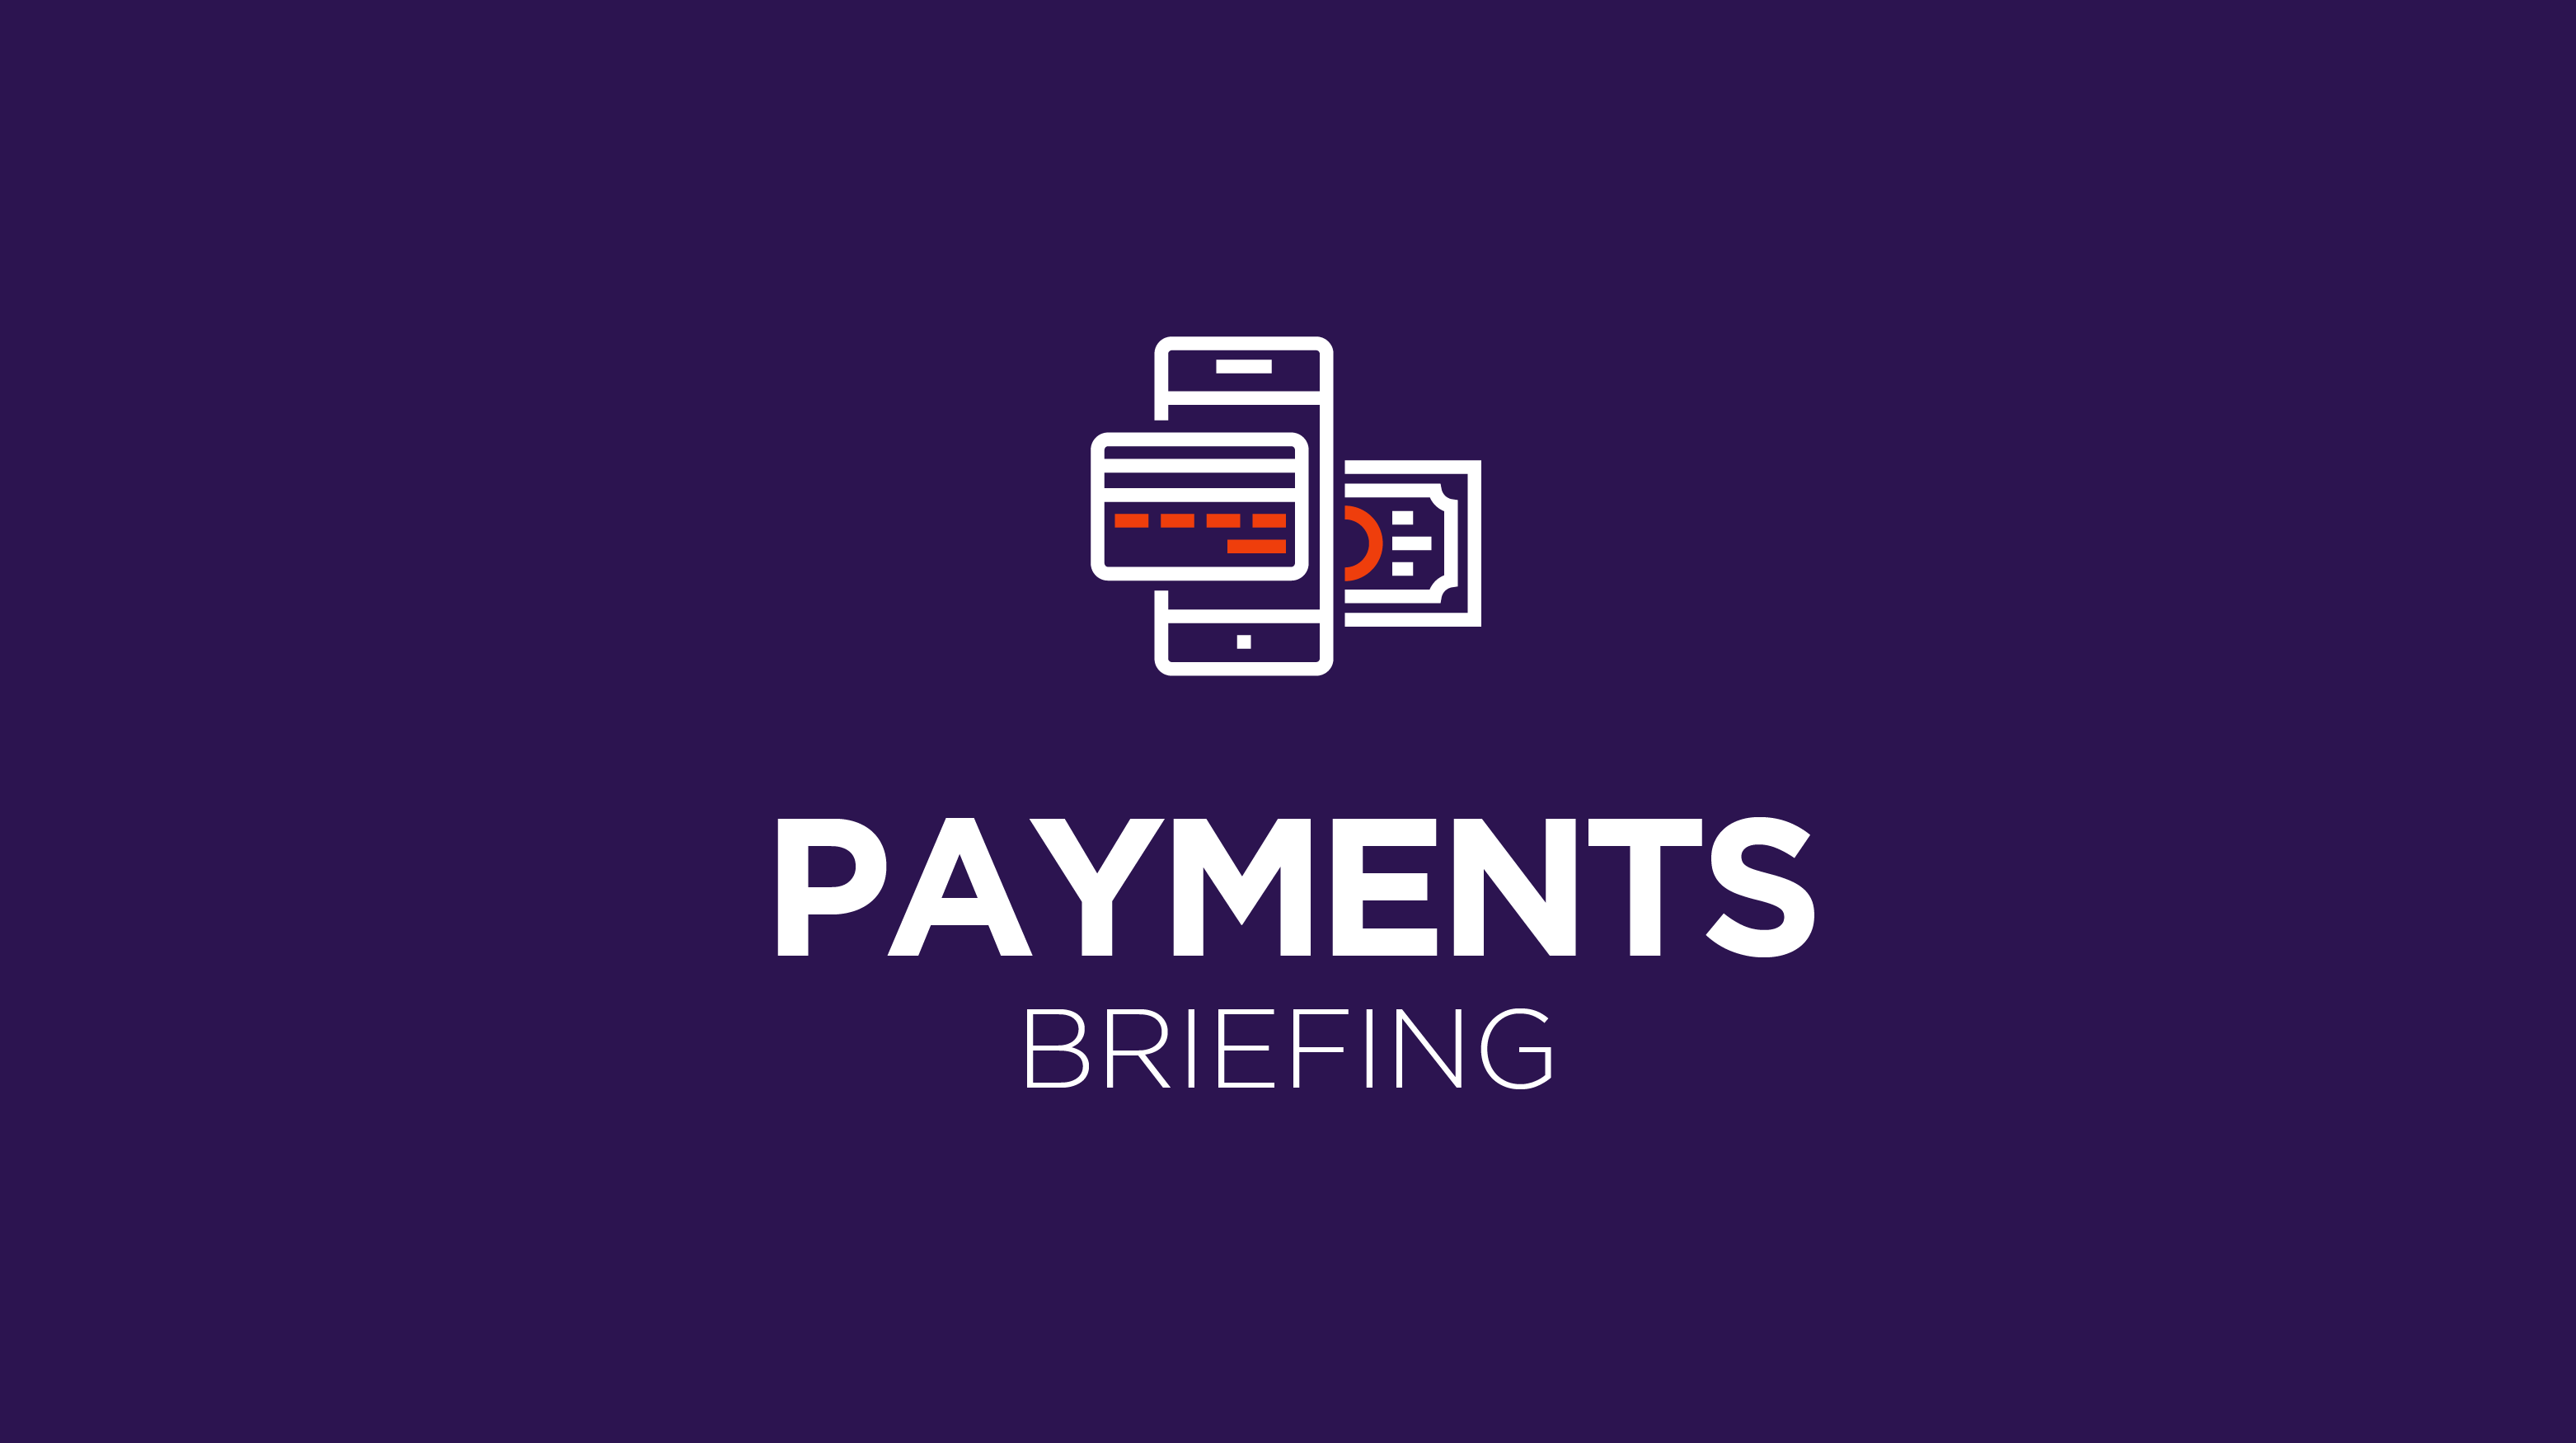 Payments Briefing: PayZen wants to combat rising medical debt with ‘Care Now, Pay Later’ solution￼